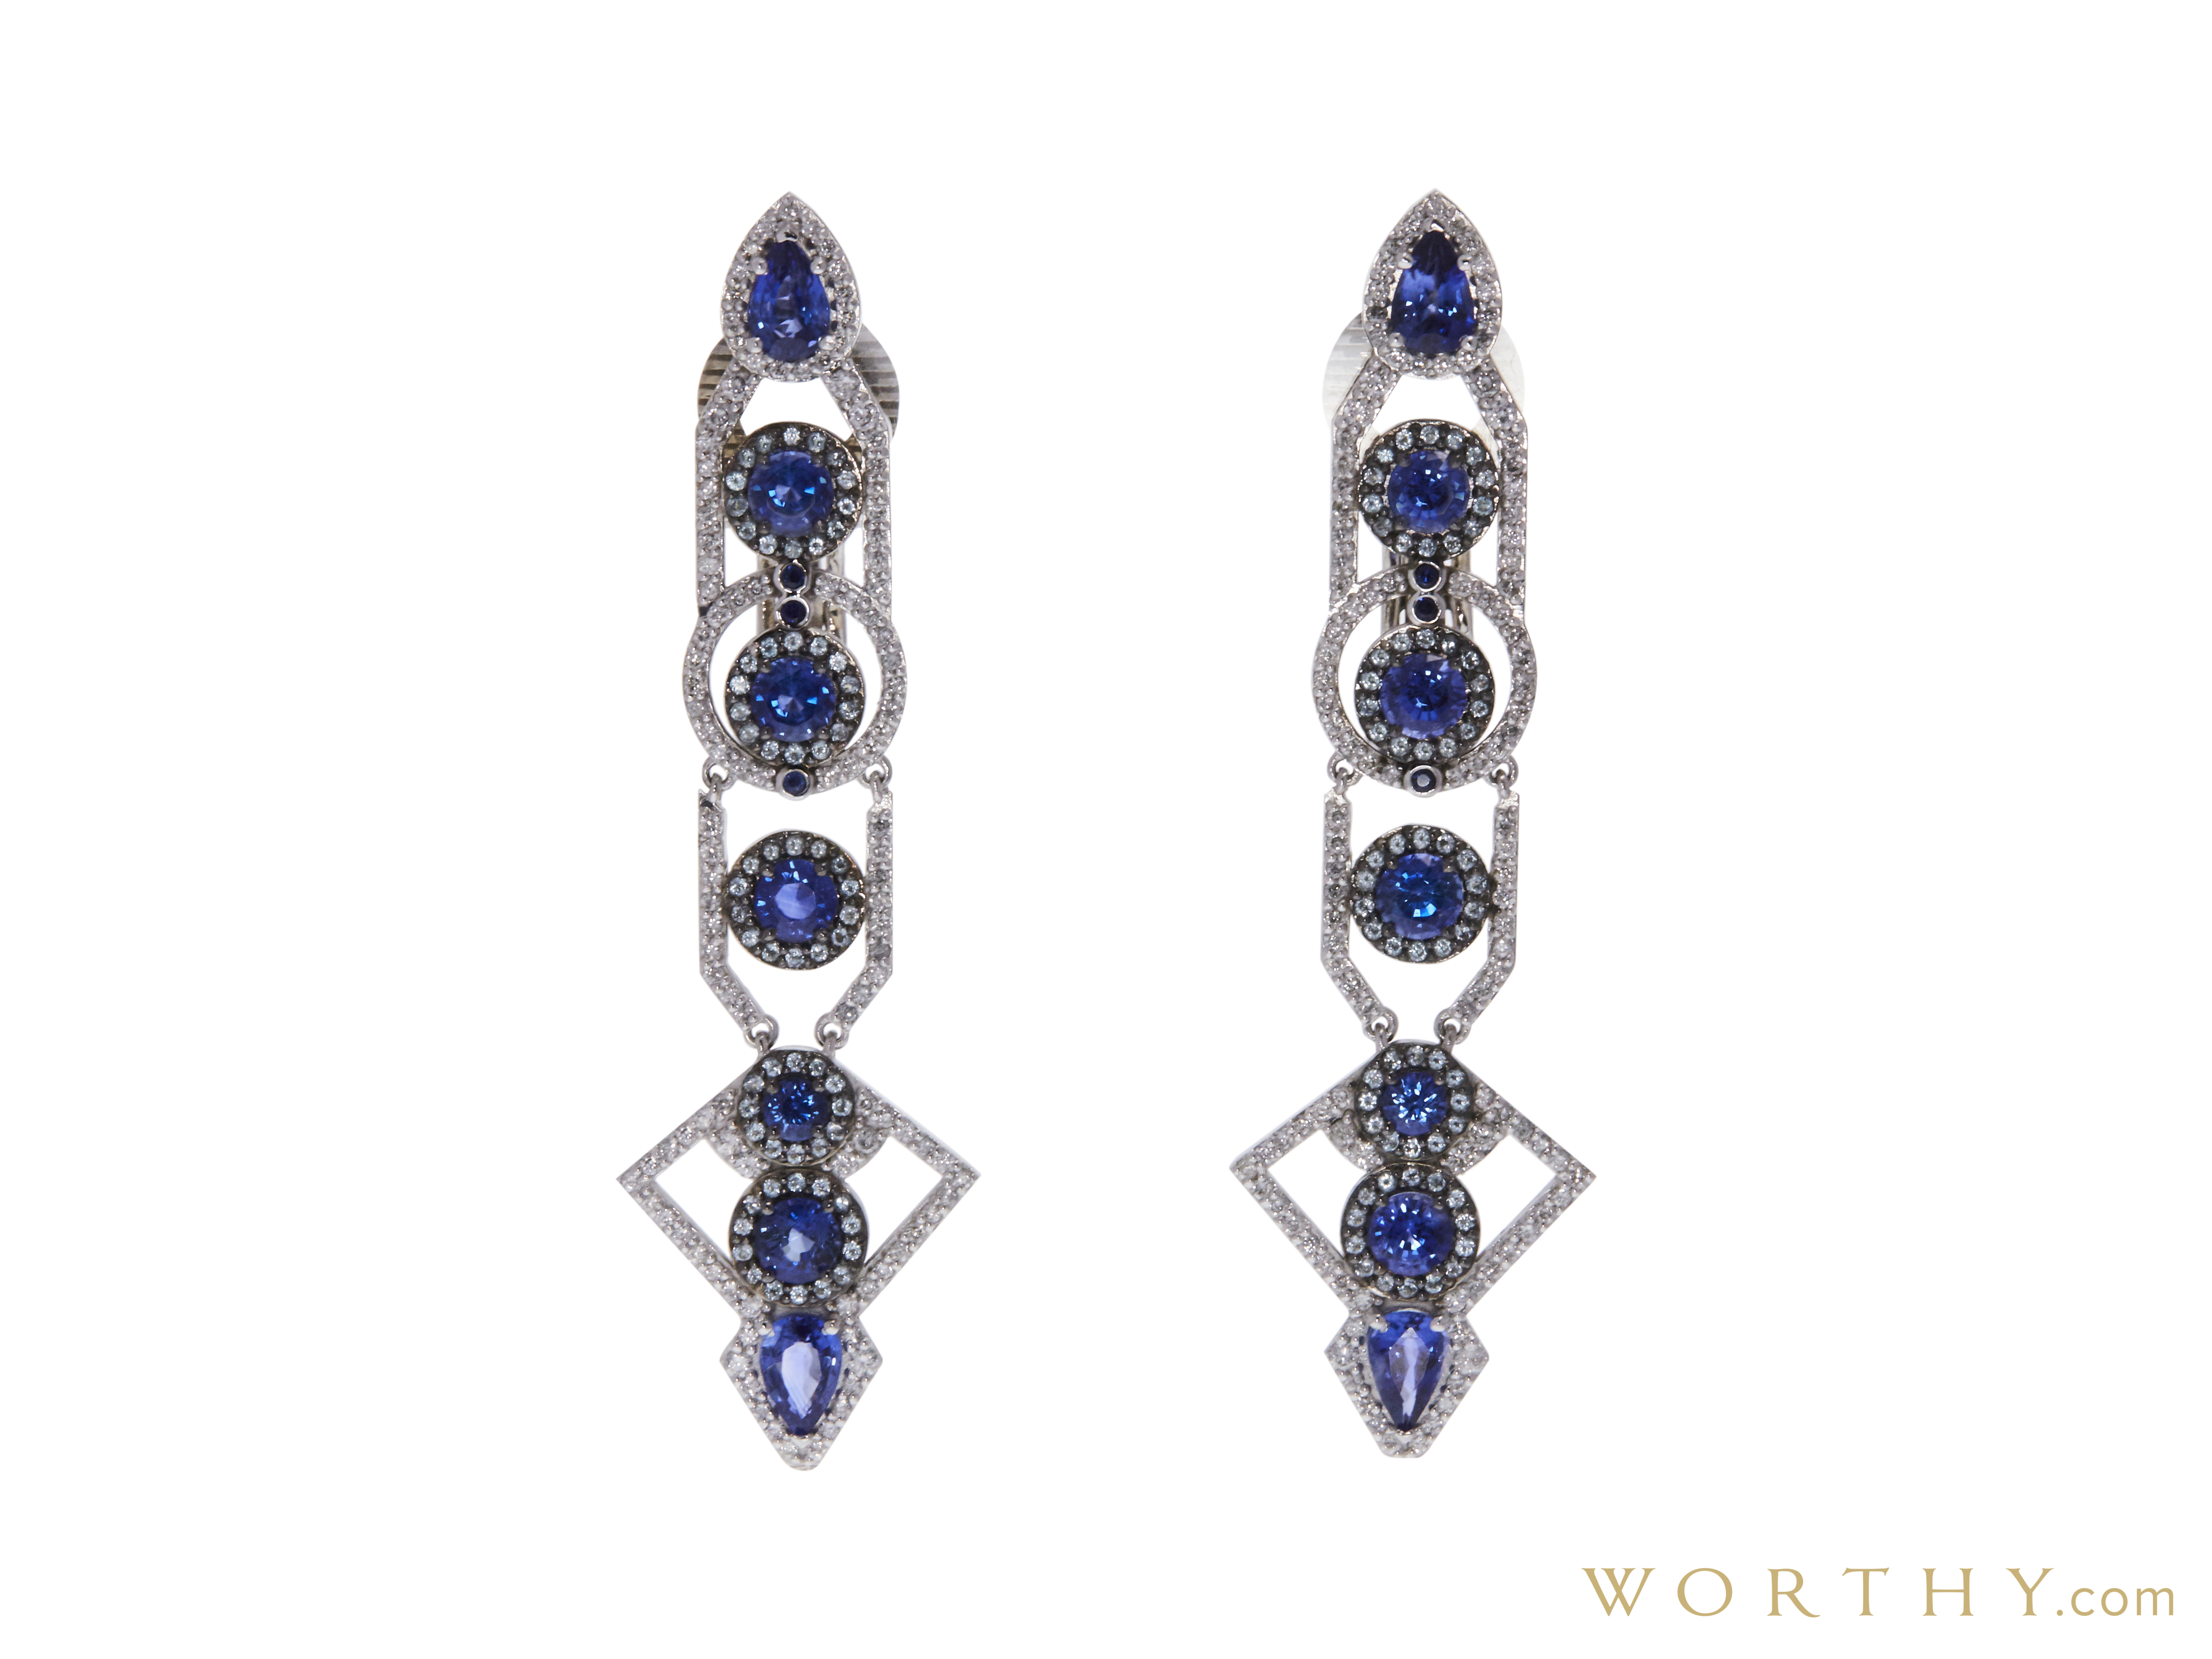 Drop Earrings | Sold For $1,300 | Worthy.com